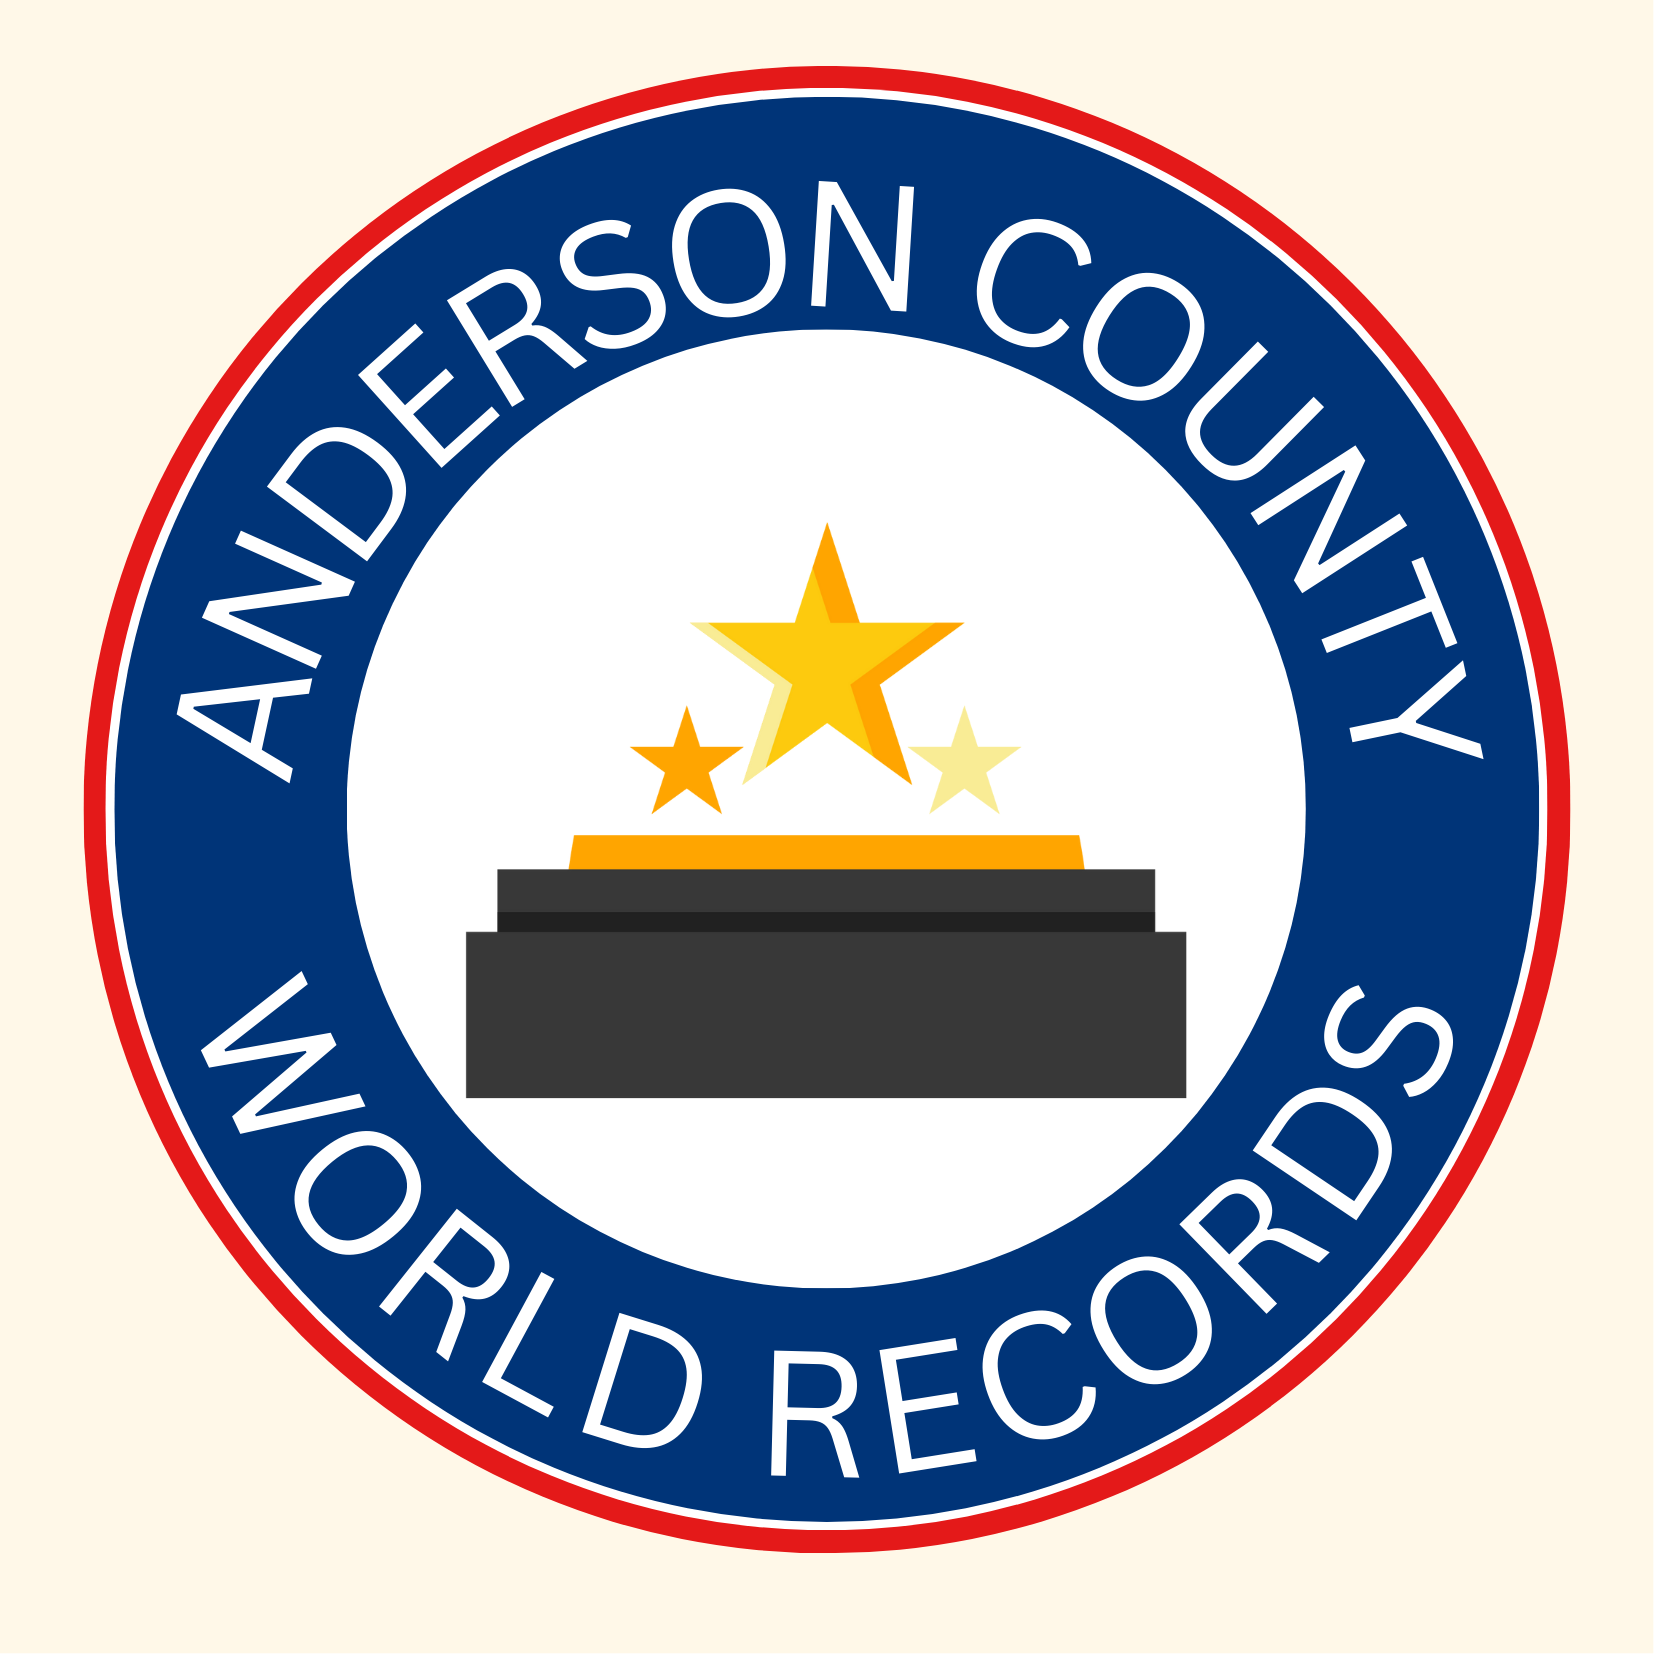 White blue red overlay circles with star trophy and Anderson County World Records around